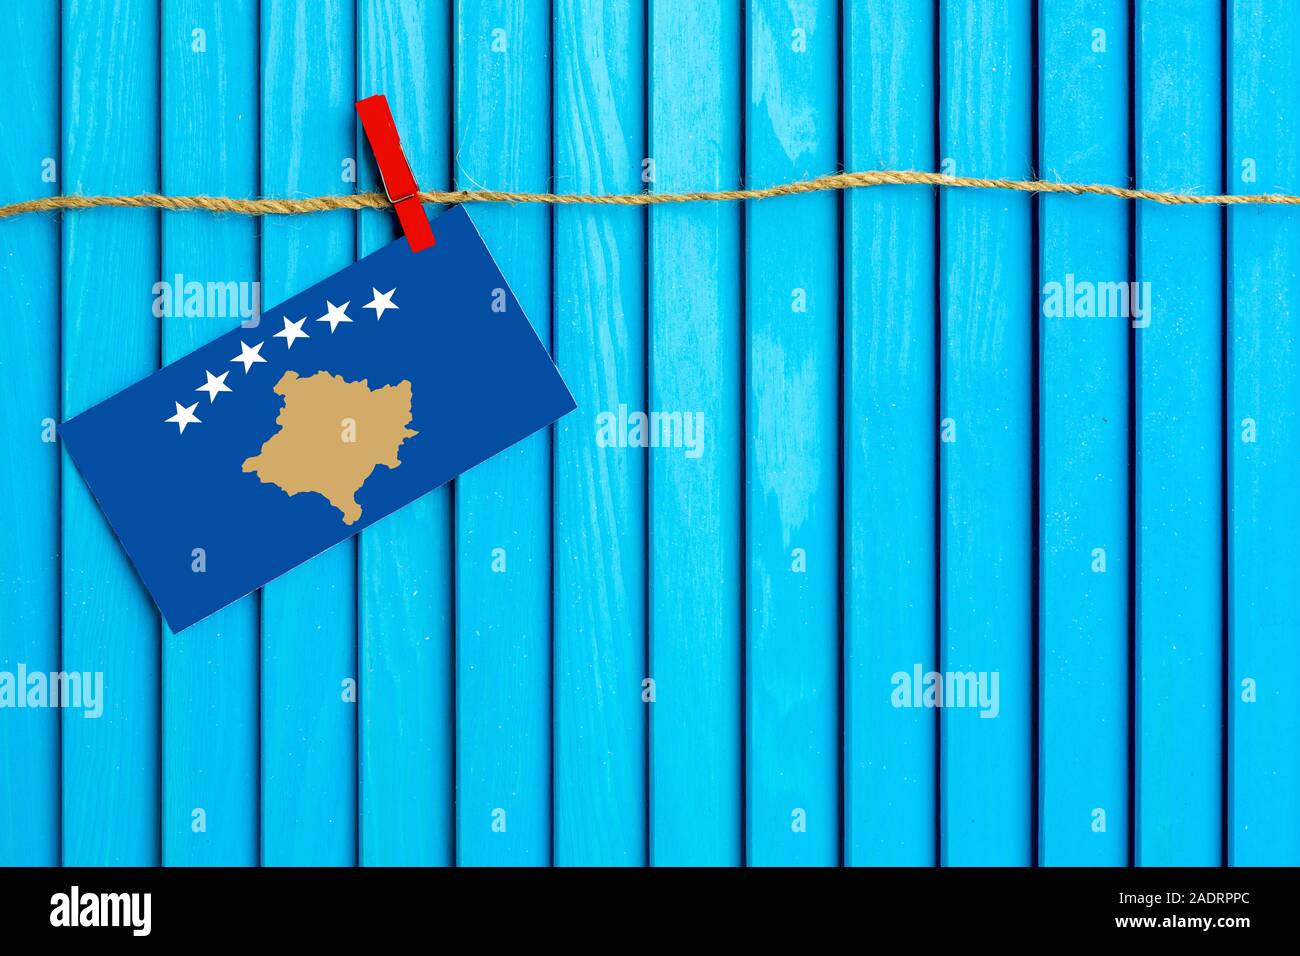 Flag of Kosovo hanging on clothesline attached with wooden clothespins on aqua blue wooden background. National day concept. Stock Photo